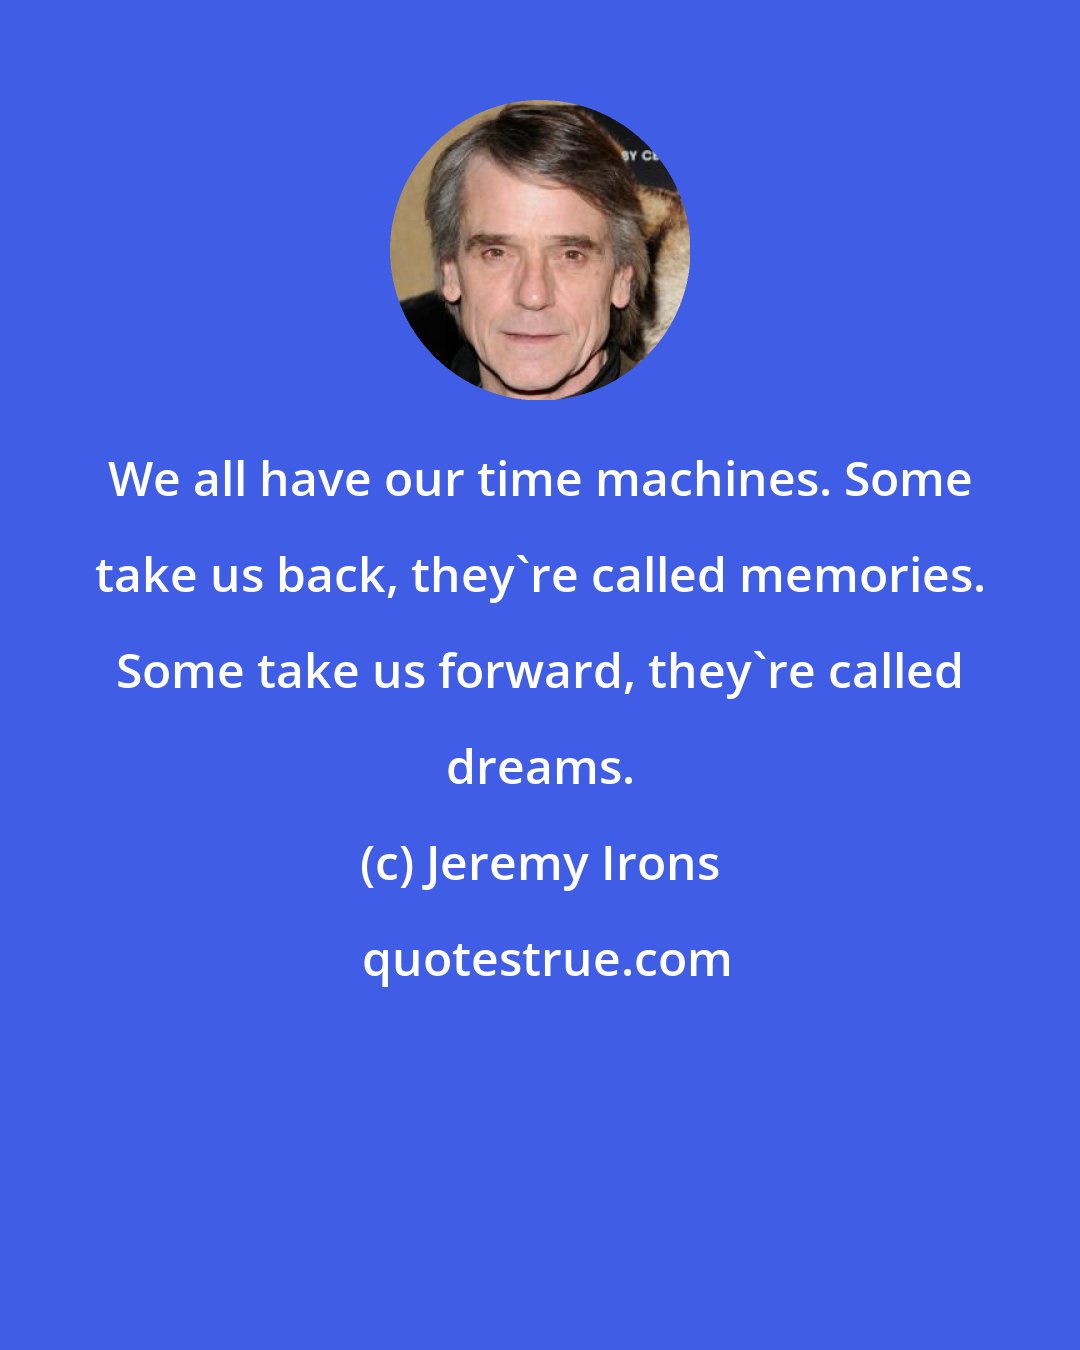 Jeremy Irons: We all have our time machines. Some take us back, they're called memories. Some take us forward, they're called dreams.